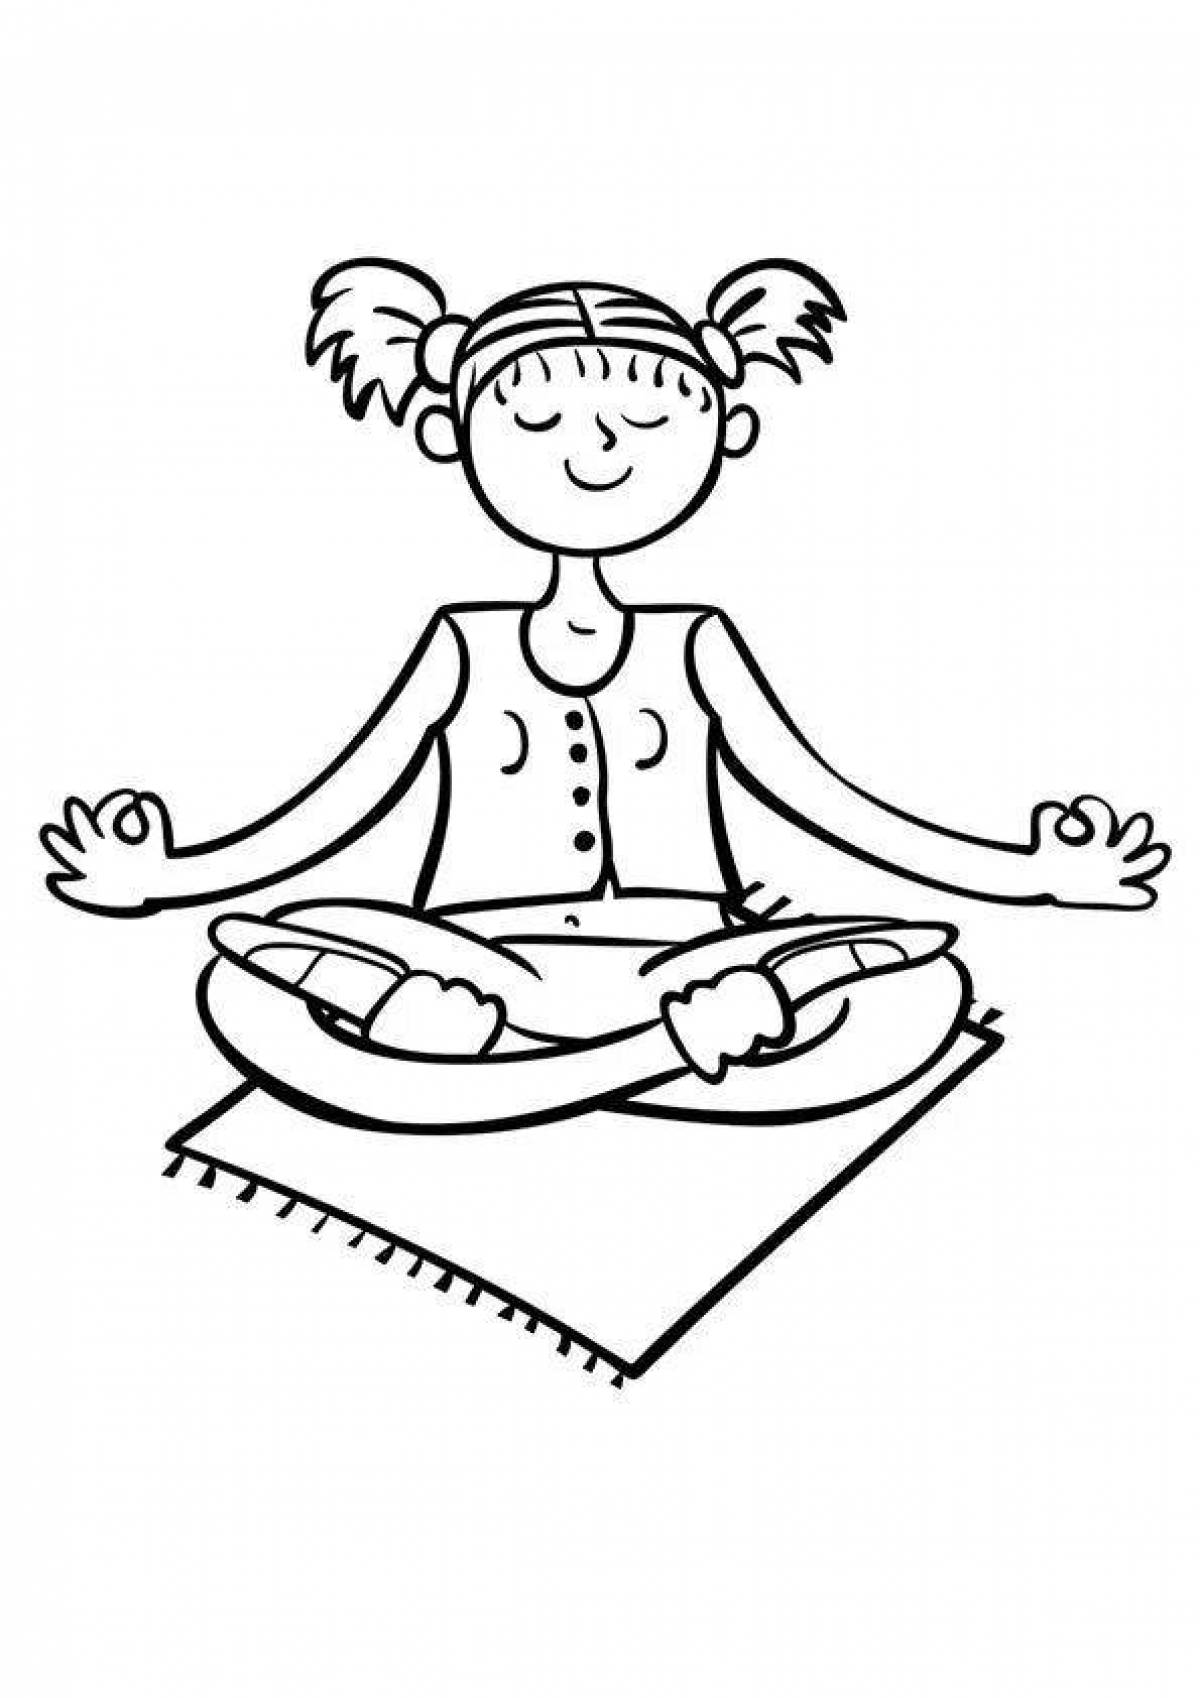 Vibrant yoga coloring page